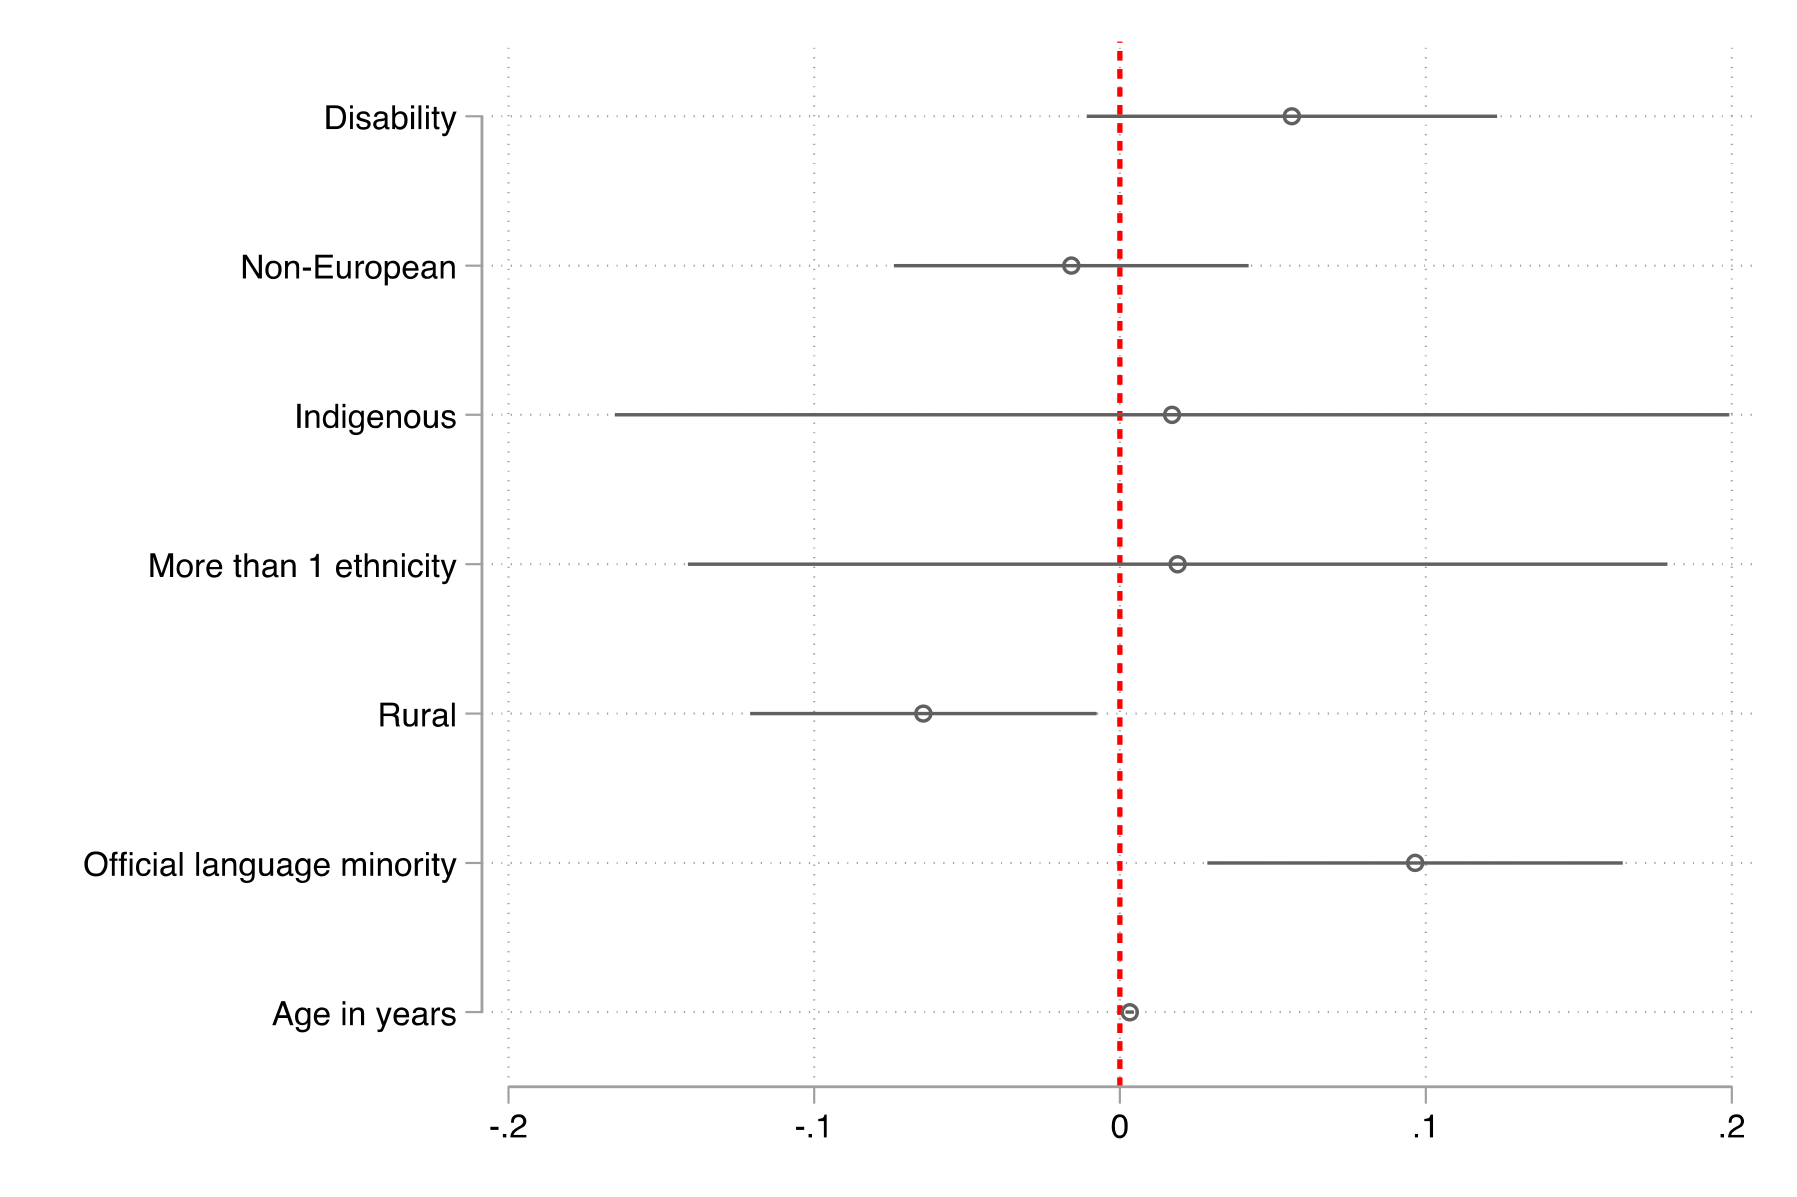 Figure 3. This figure shows the correlation between debate awareness and various socio-demographic groups. It shows that individuals living in rural areas were less aware of the debates than individuals living in urban areas; that official language minorities were more aware of the debates than individuals who are not official language minorities; and that older individuals were more aware of the debates.